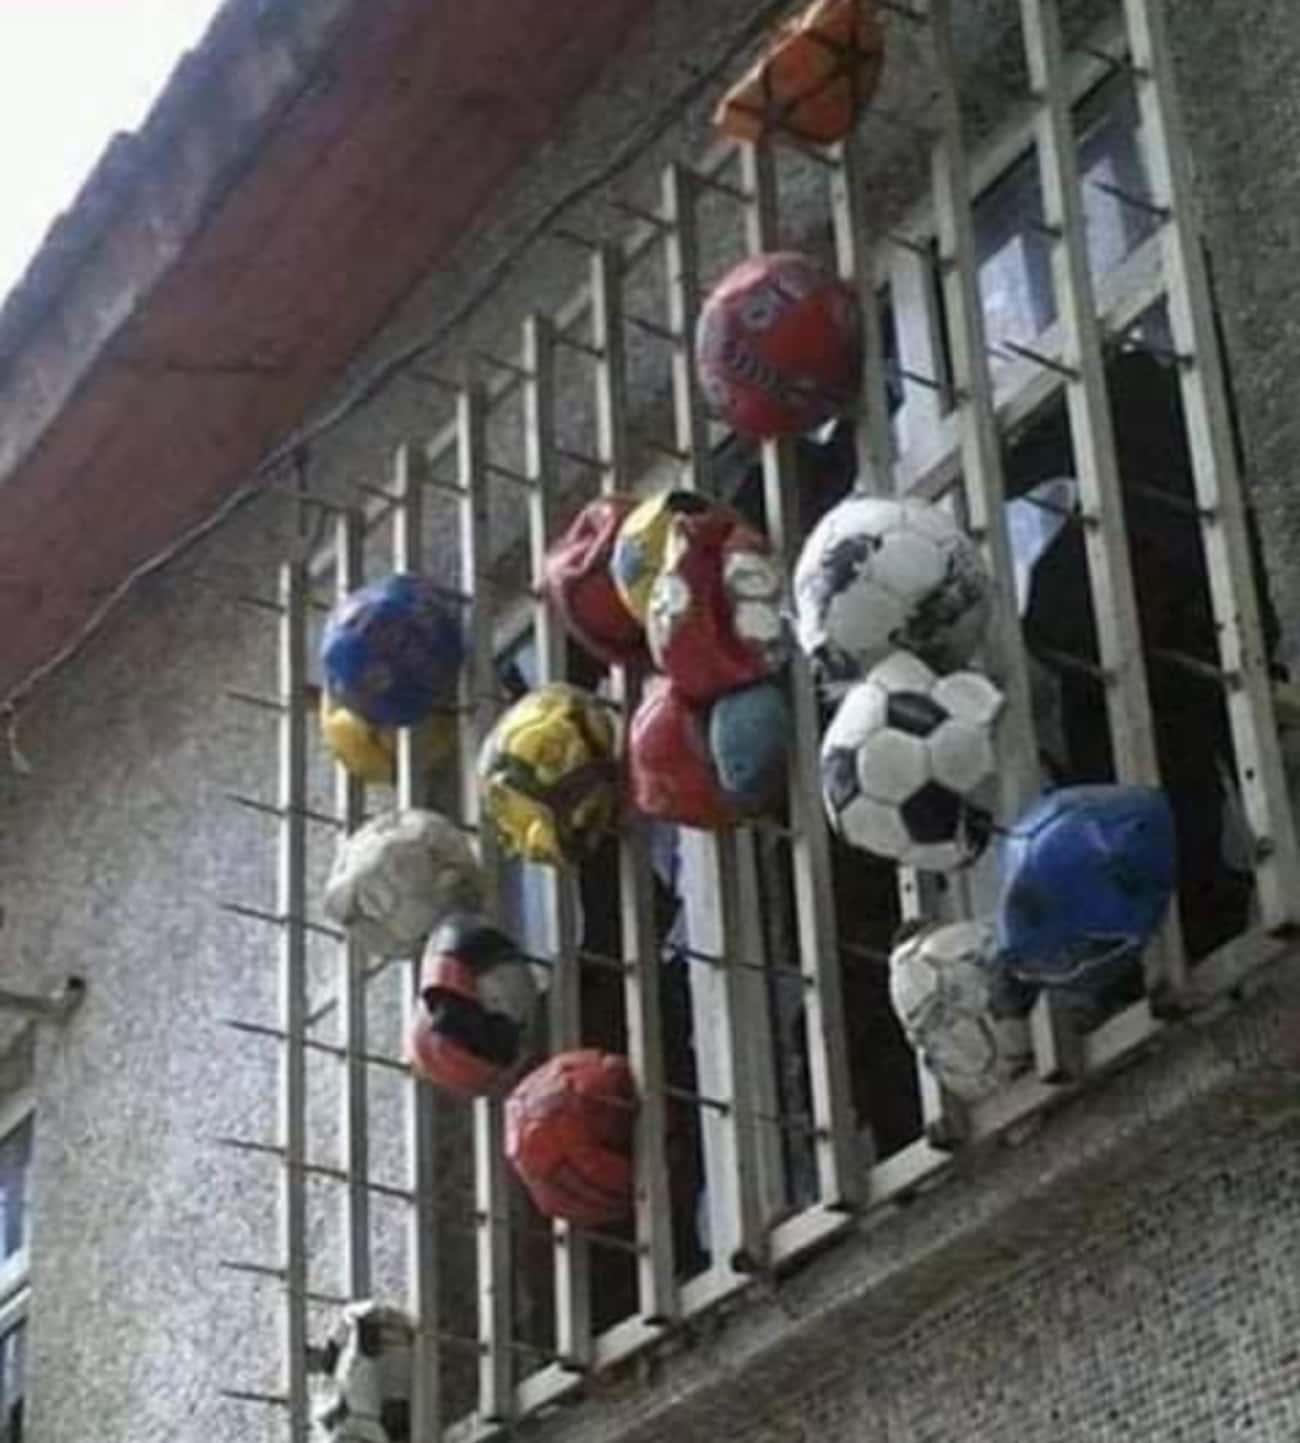 How To Stop Footballs From Hitting Your Window